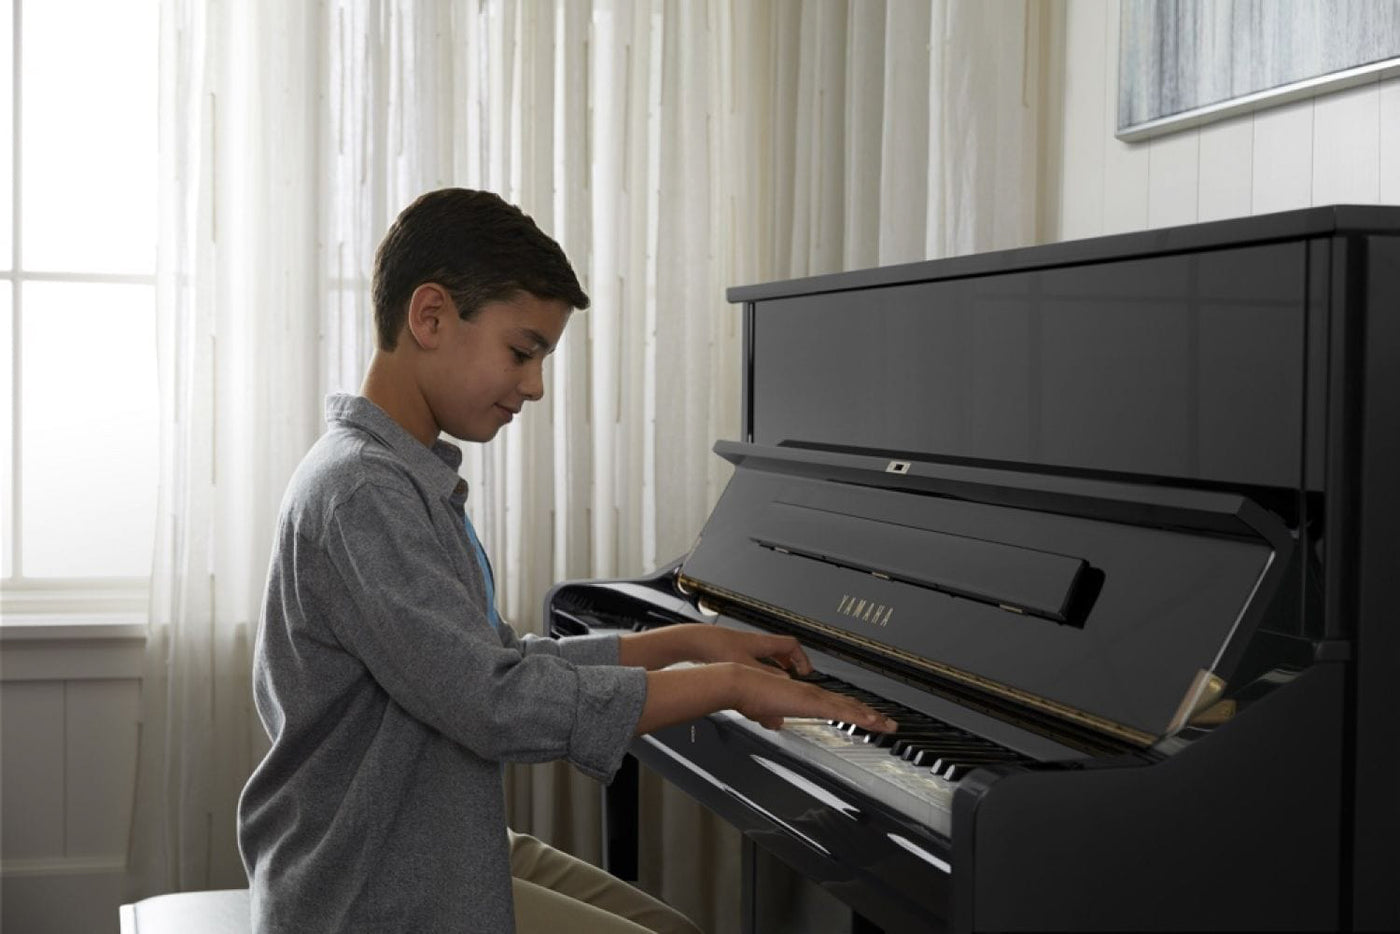 A young person practicing on a black Yamaha upright piano in a room with natural light filtering through sheer curtains.